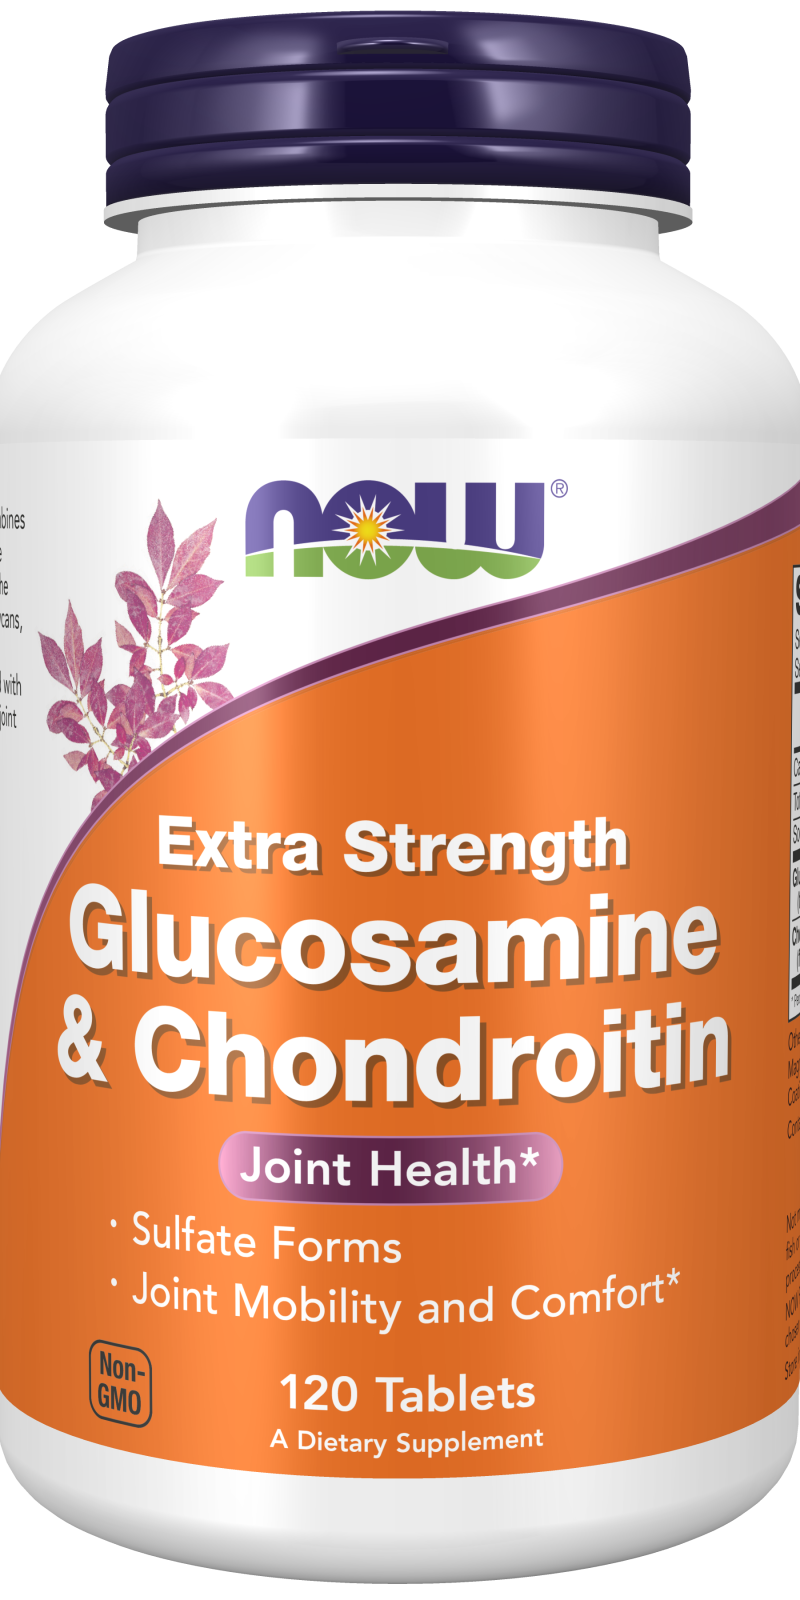 Glucosamine & Chondroitin Extra Strength - 120 Tablets Bottle